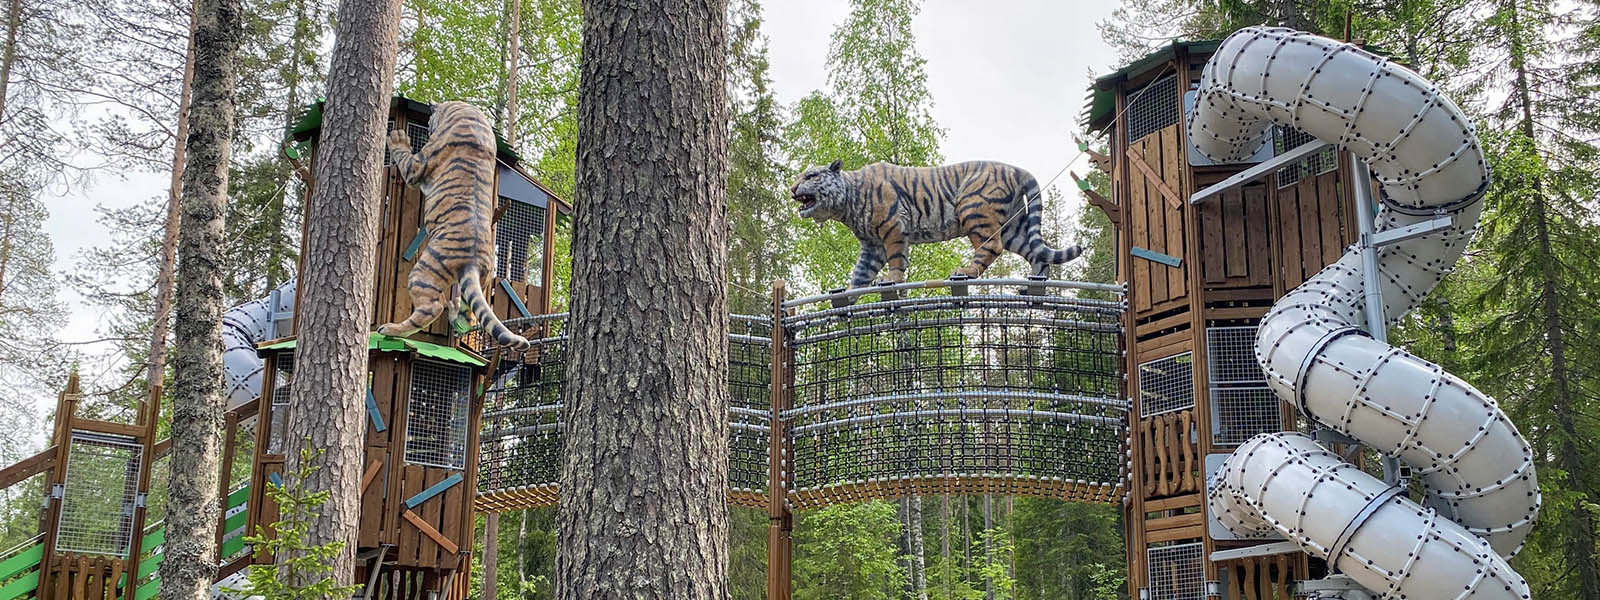 Tiger-themed playground in Finland